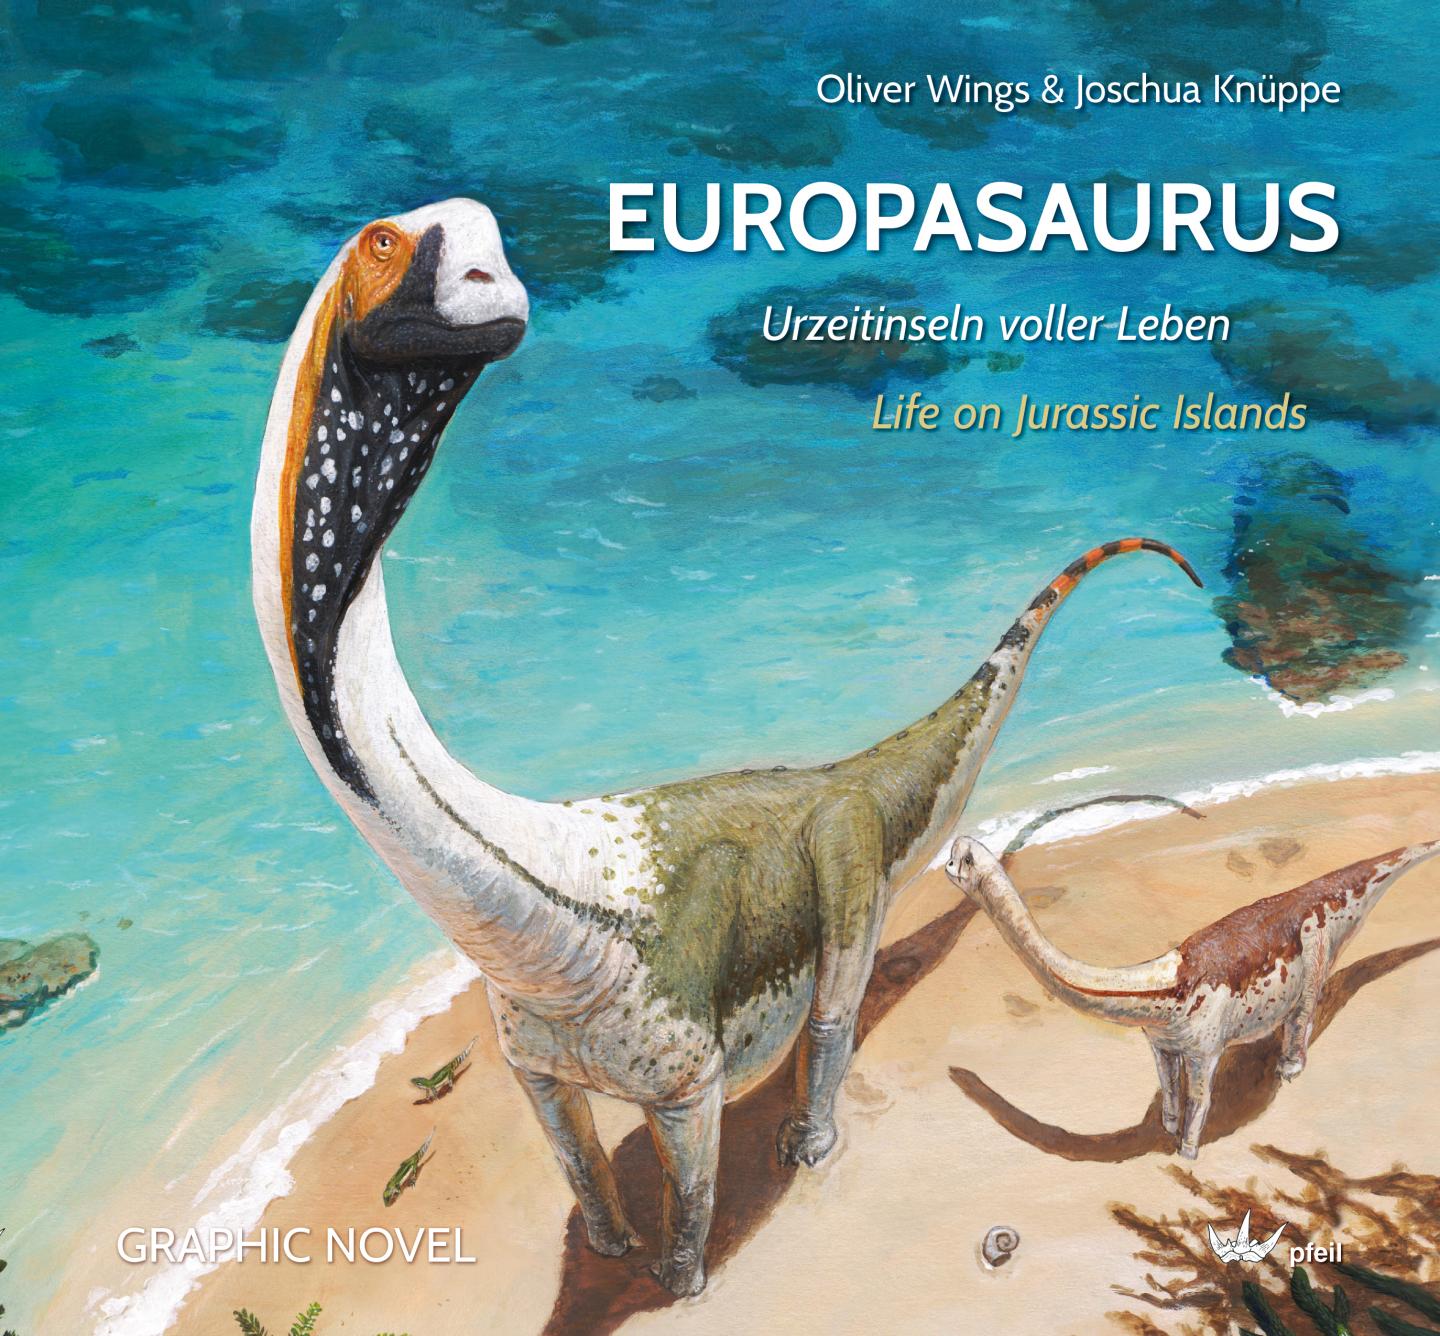 Book Cover of the New Europasaurus Graphic Novel